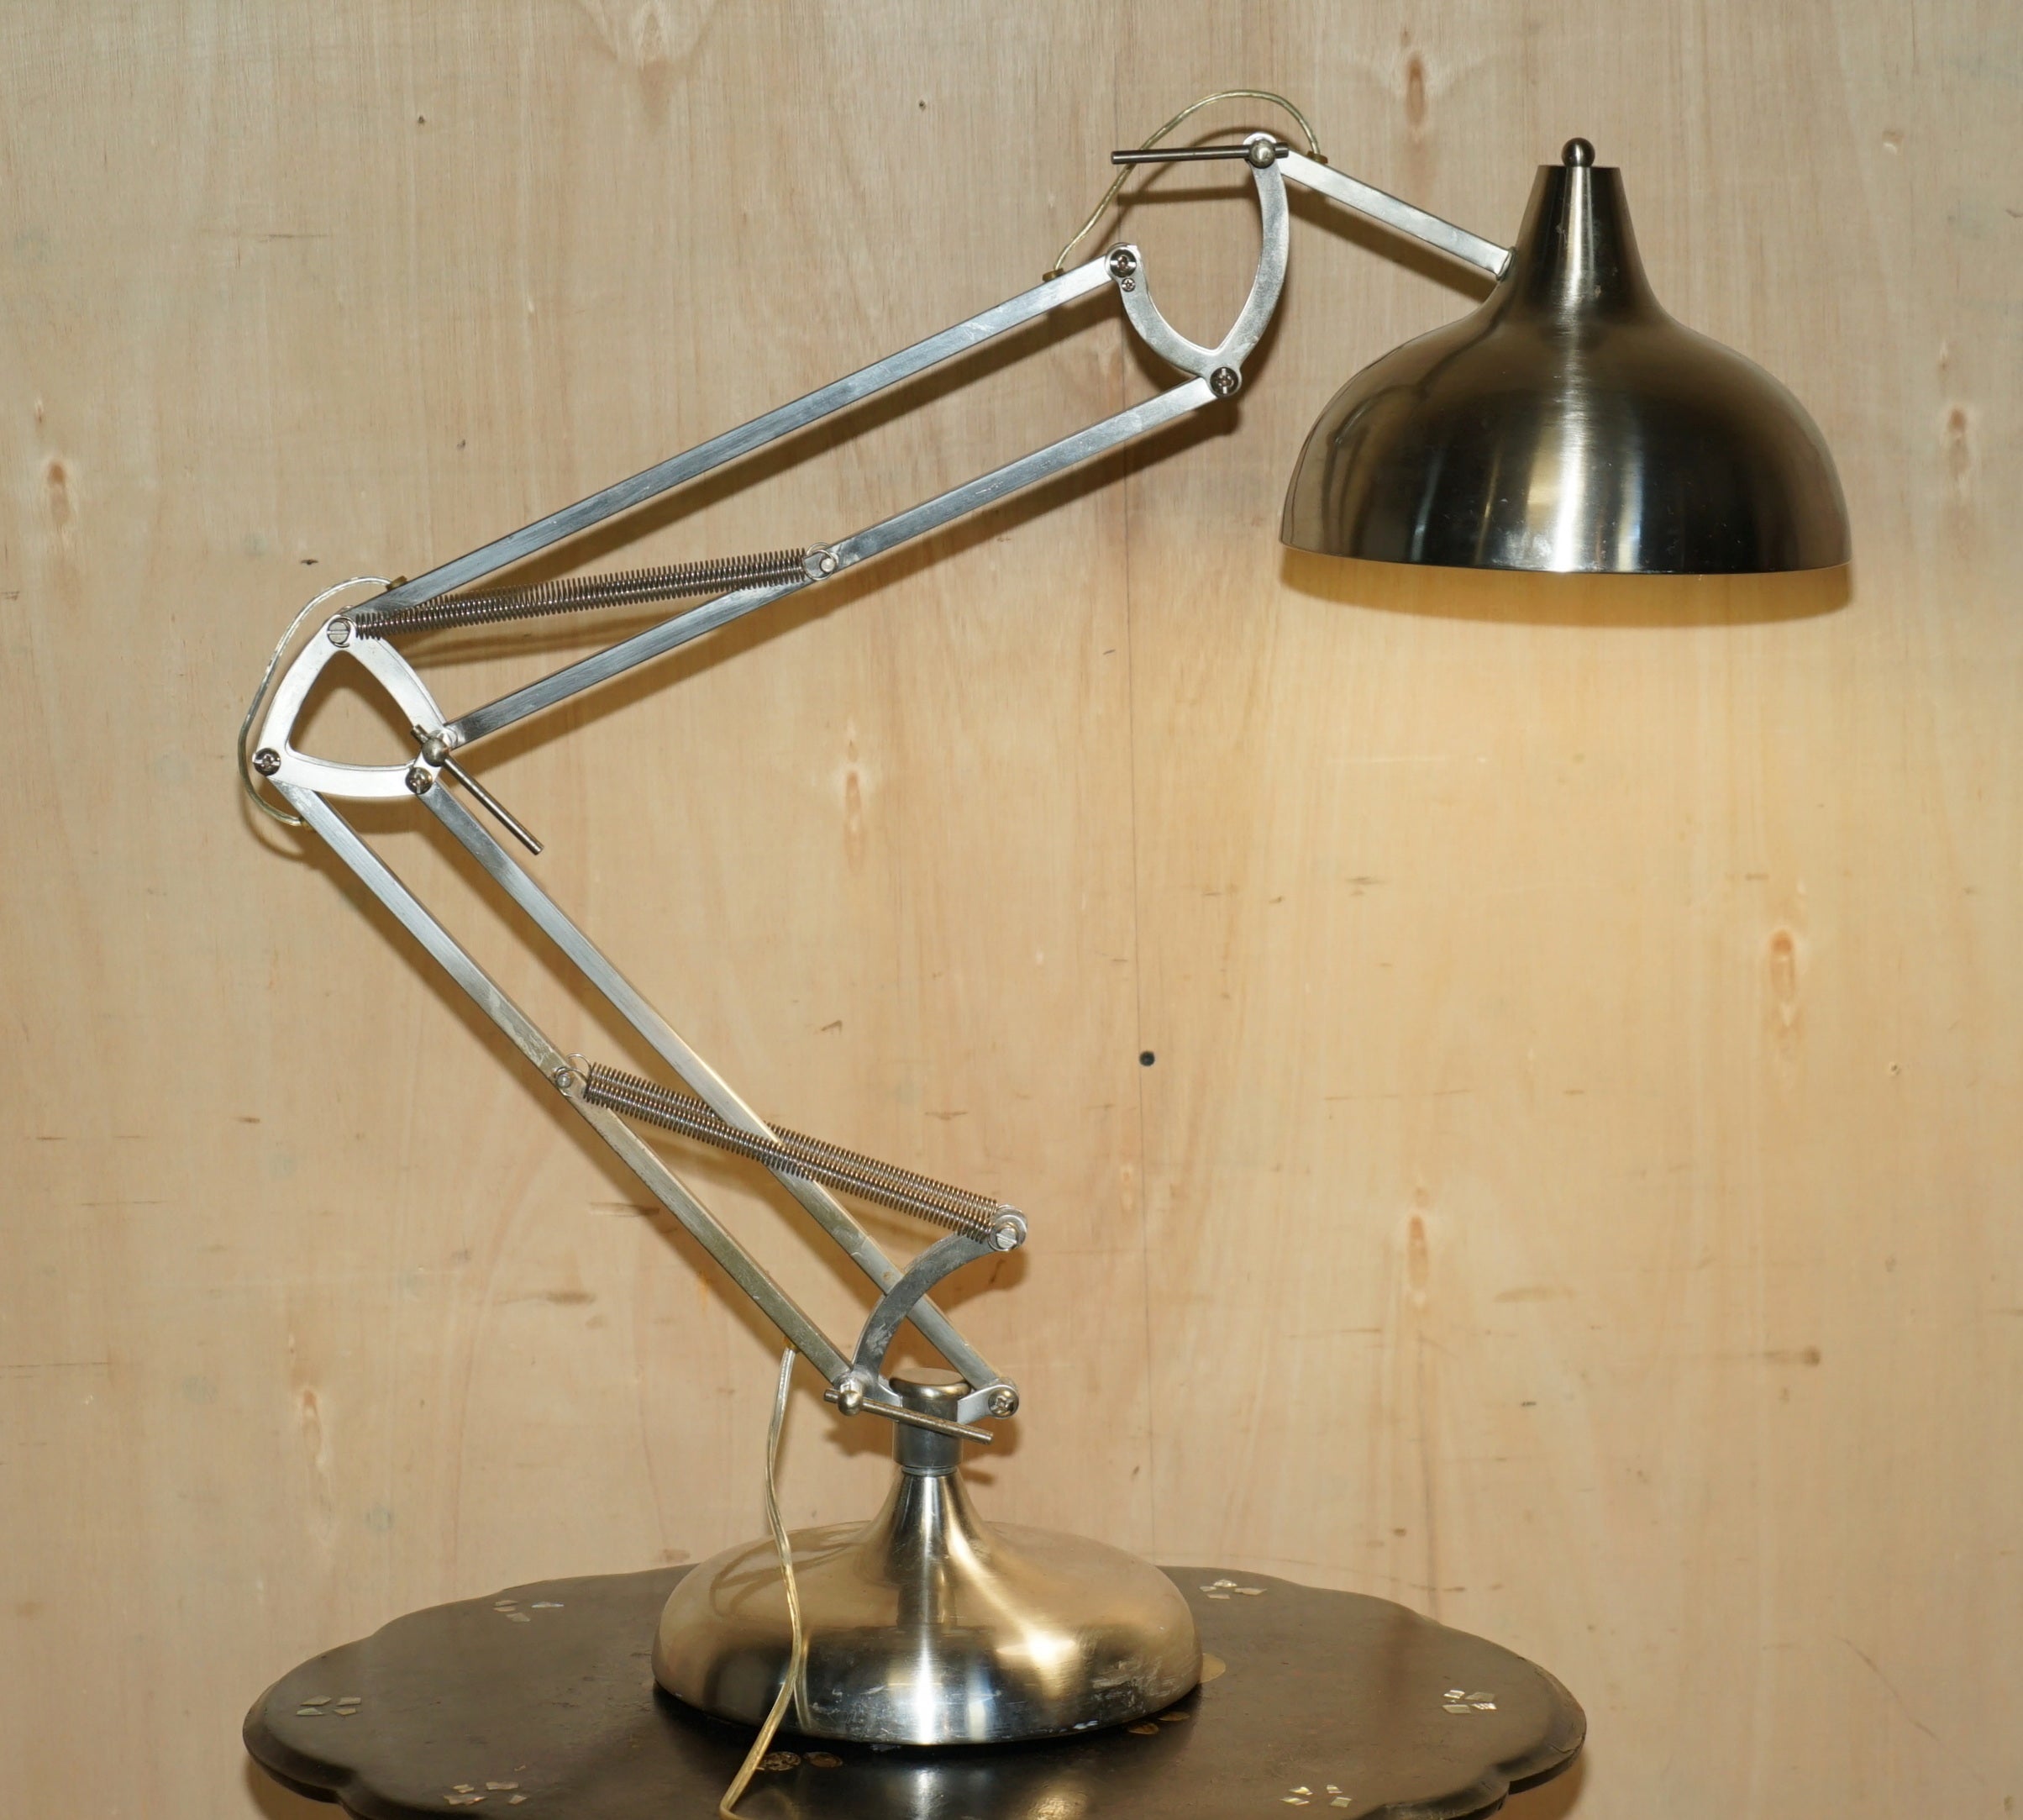 Royal House Antiques

Royal House Antiques is delighted to offer for sale this super cool mid century modern circa 1950's extra large Articulated Anglepoise table lamp from Nice France 

A very good looking and well made piece, this is the largest